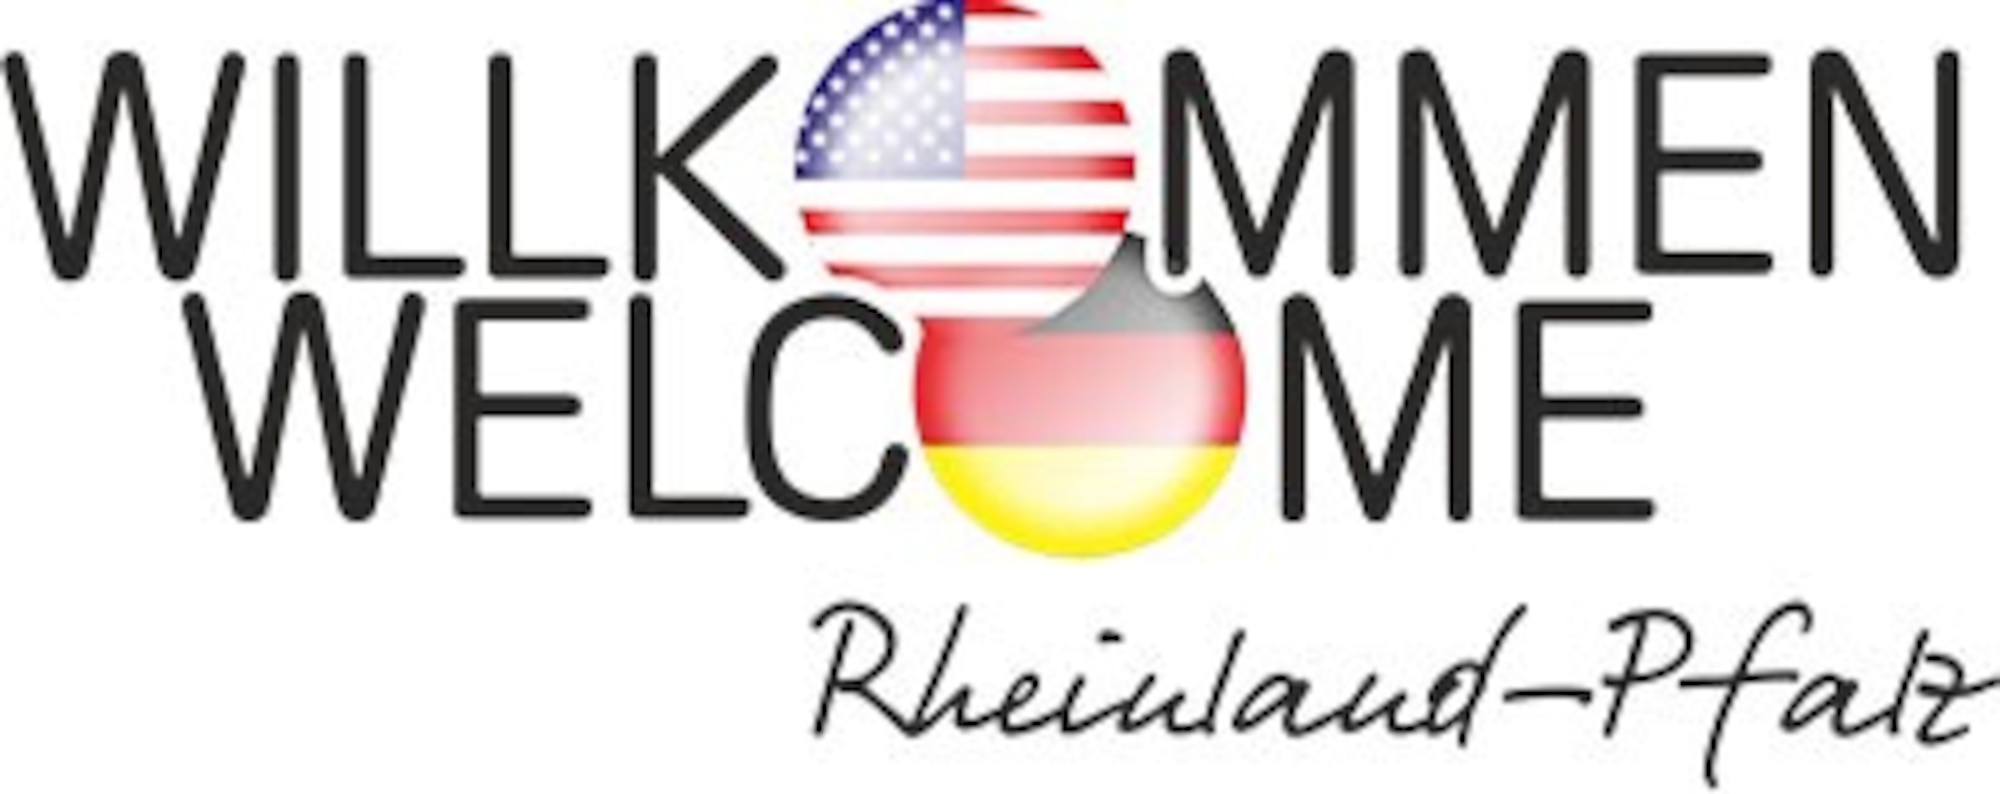 A new initiative called “Welcome to Rheinland-Pfalz!” provides information on what resources are available to U.S. service members.